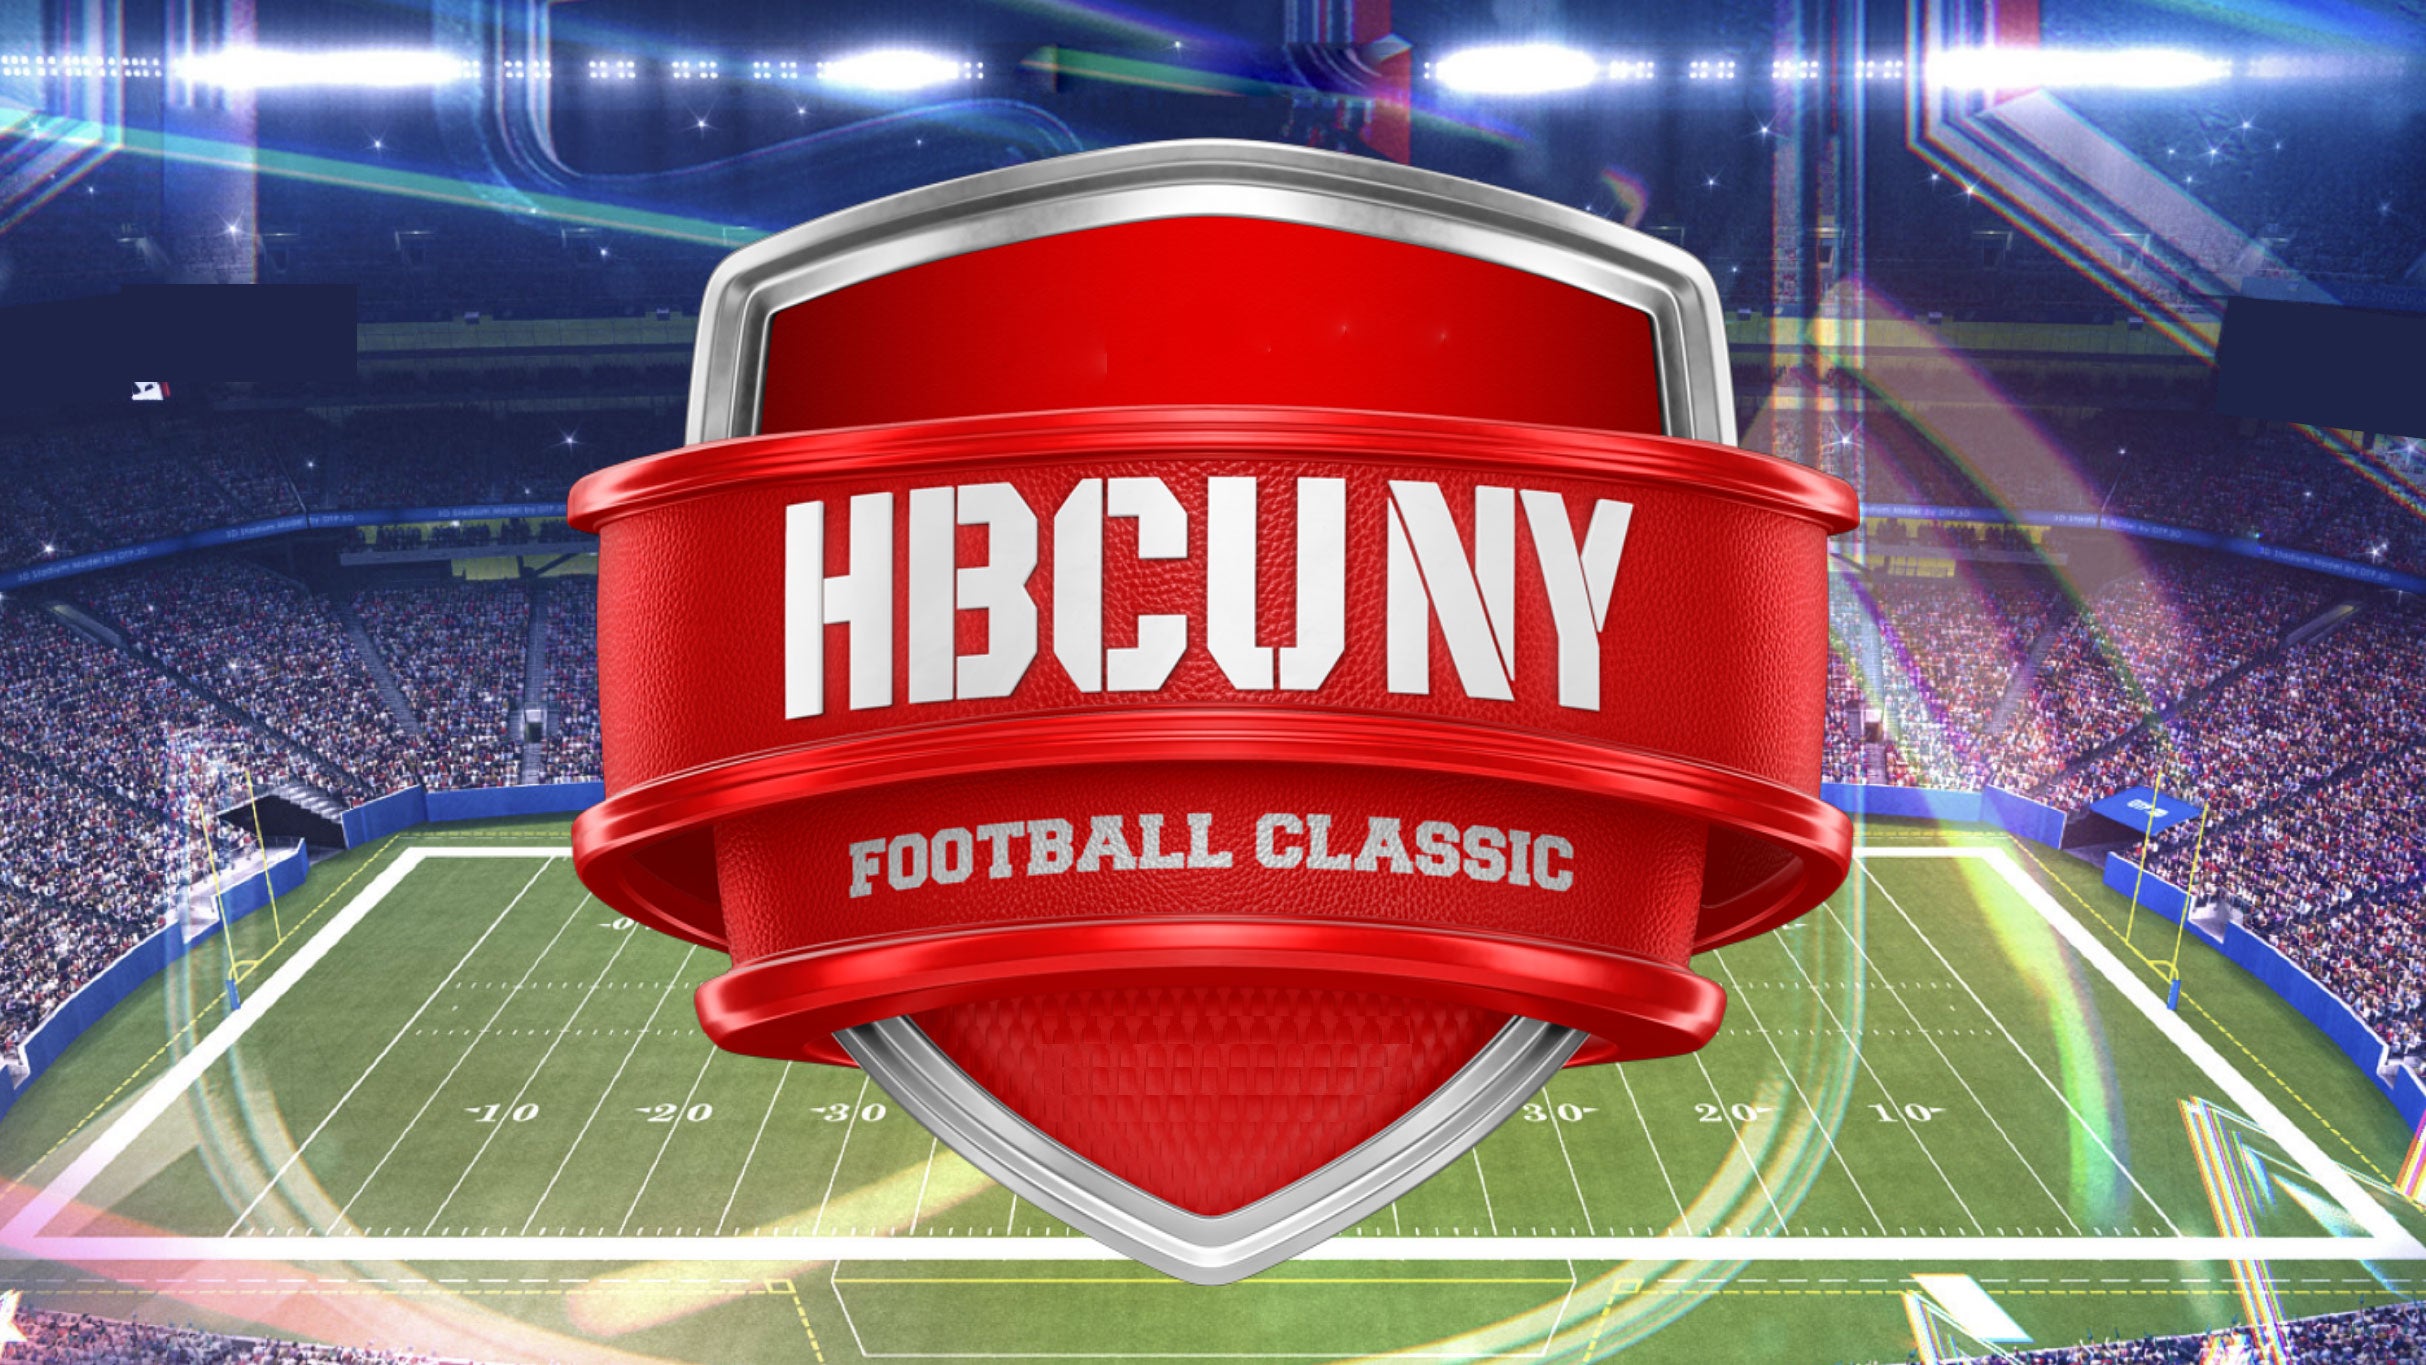 new presale code for HBCU New York Football Classic-Morehouse College v. Howard University tickets in East Rutherford